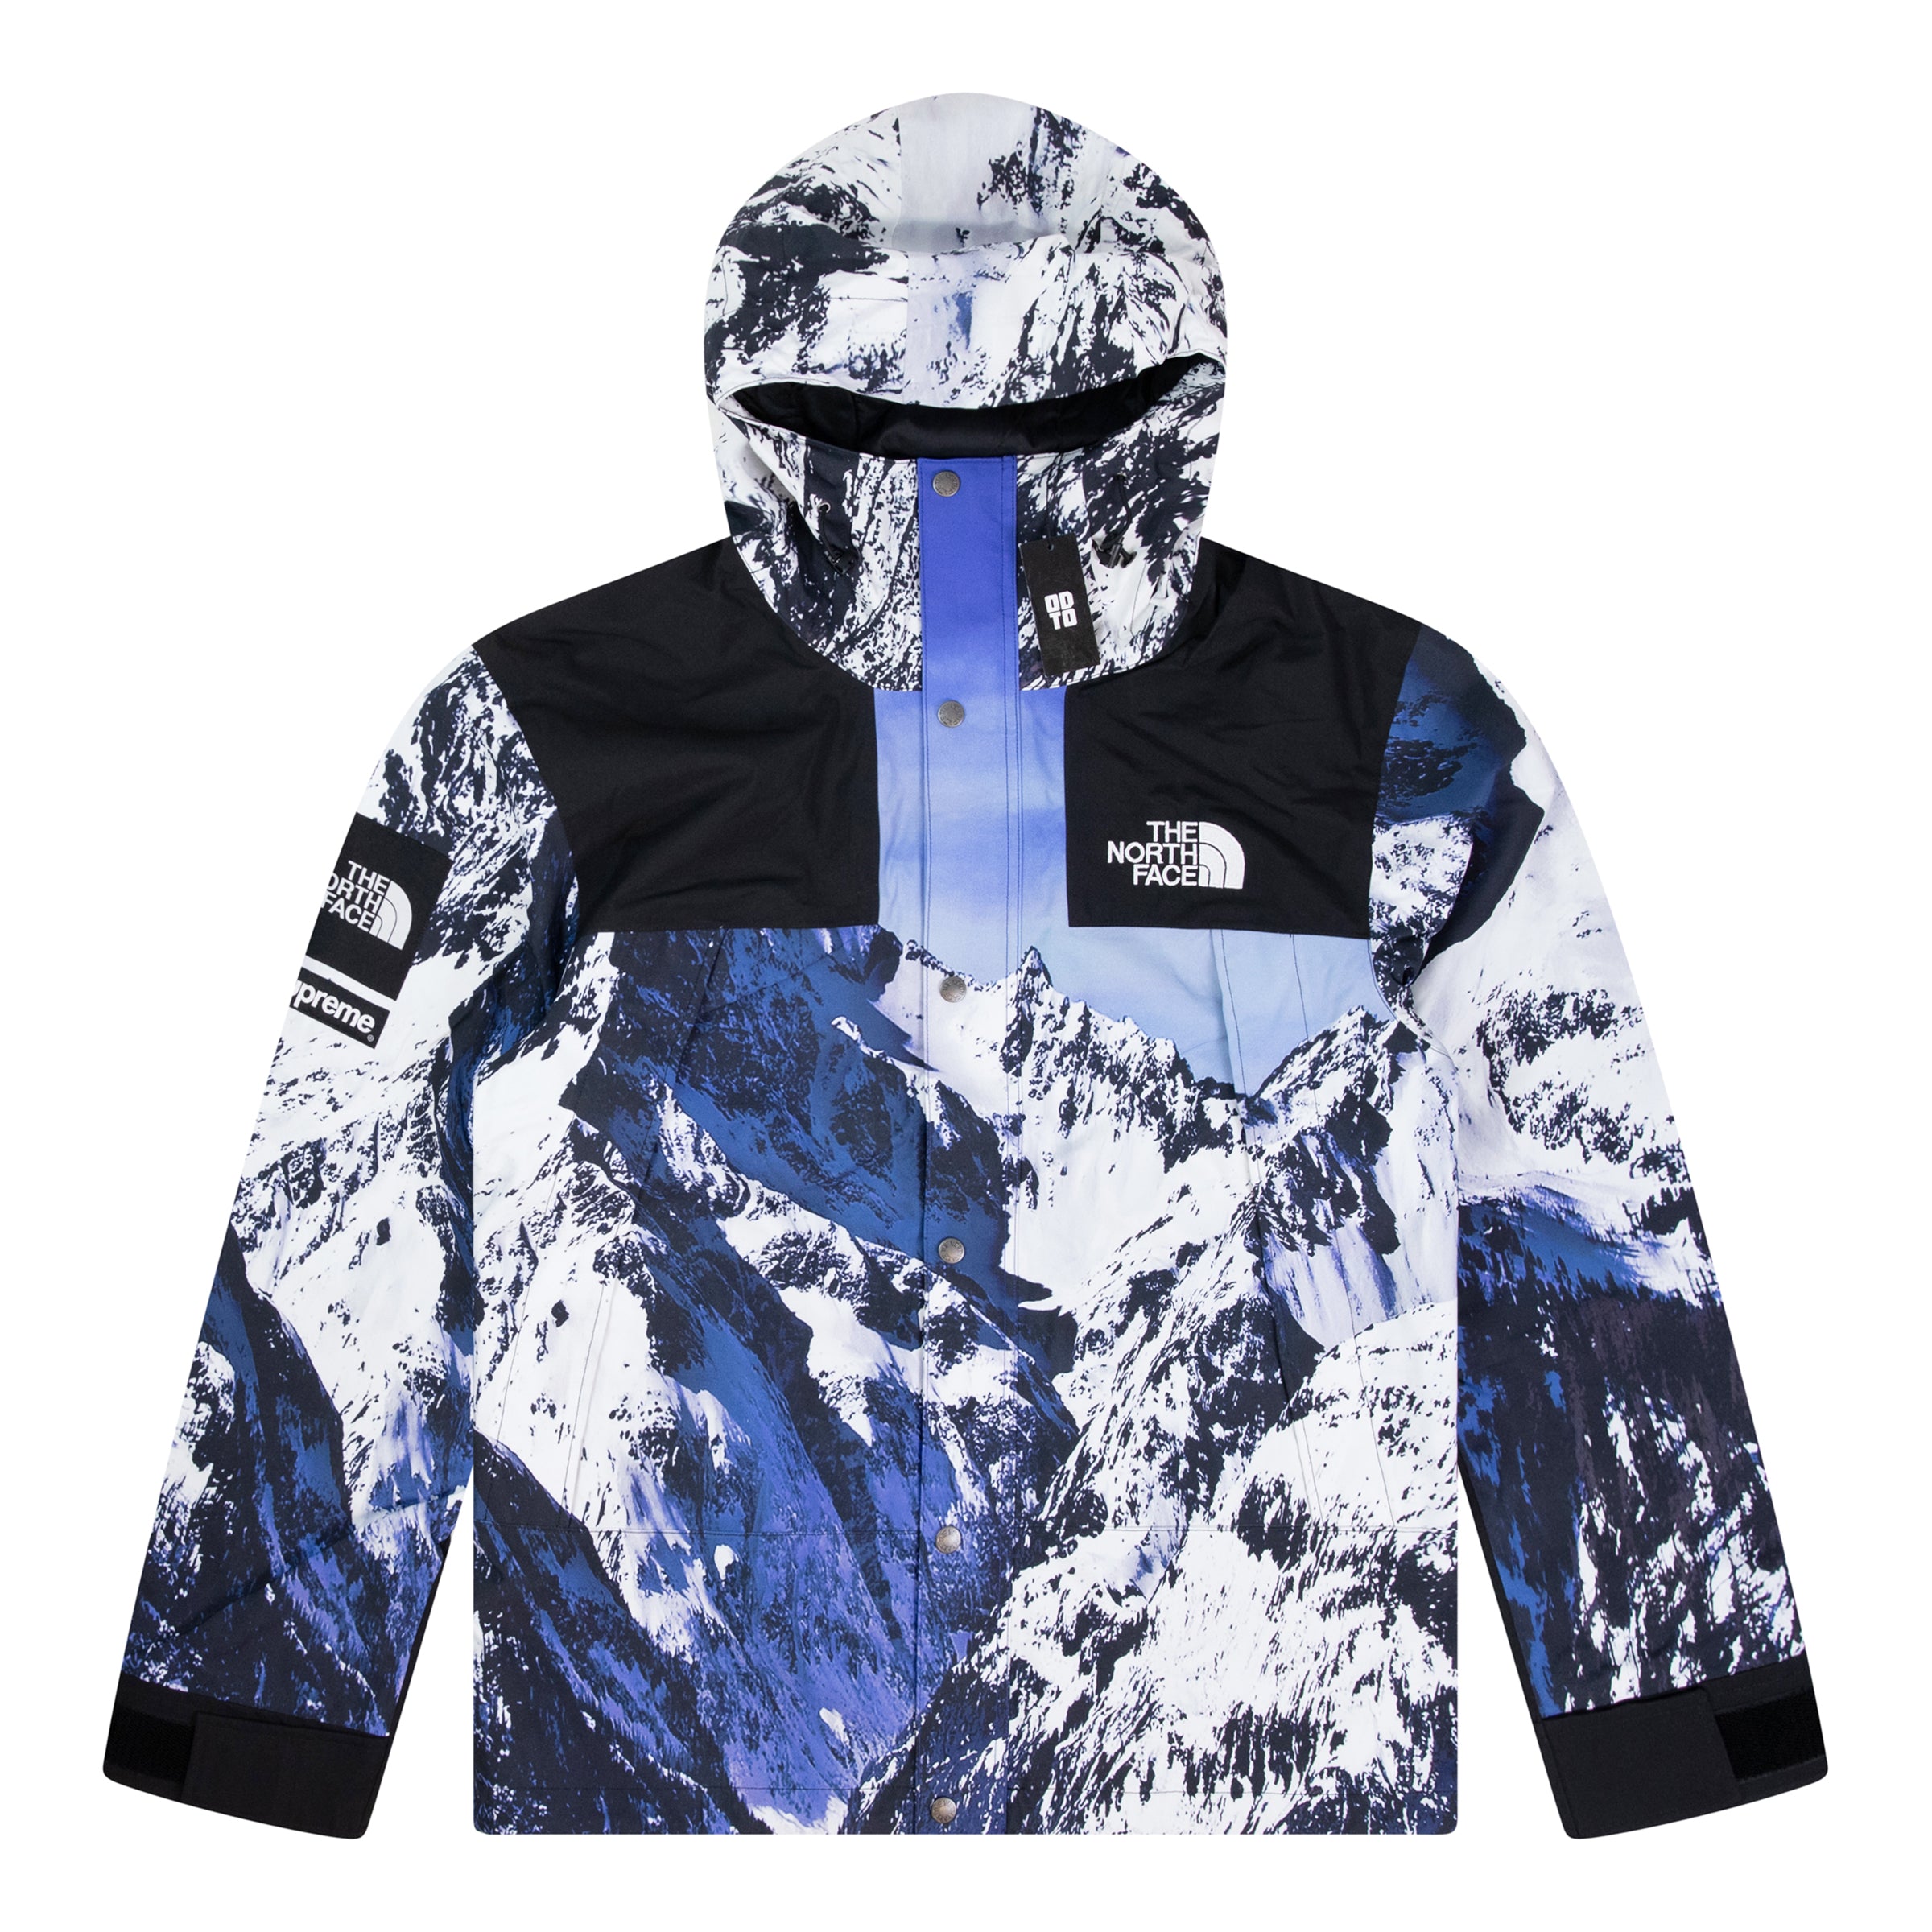 SUPREME THE NORTH FACE MOUNTAIN 派克大衣 MOUNTAIN